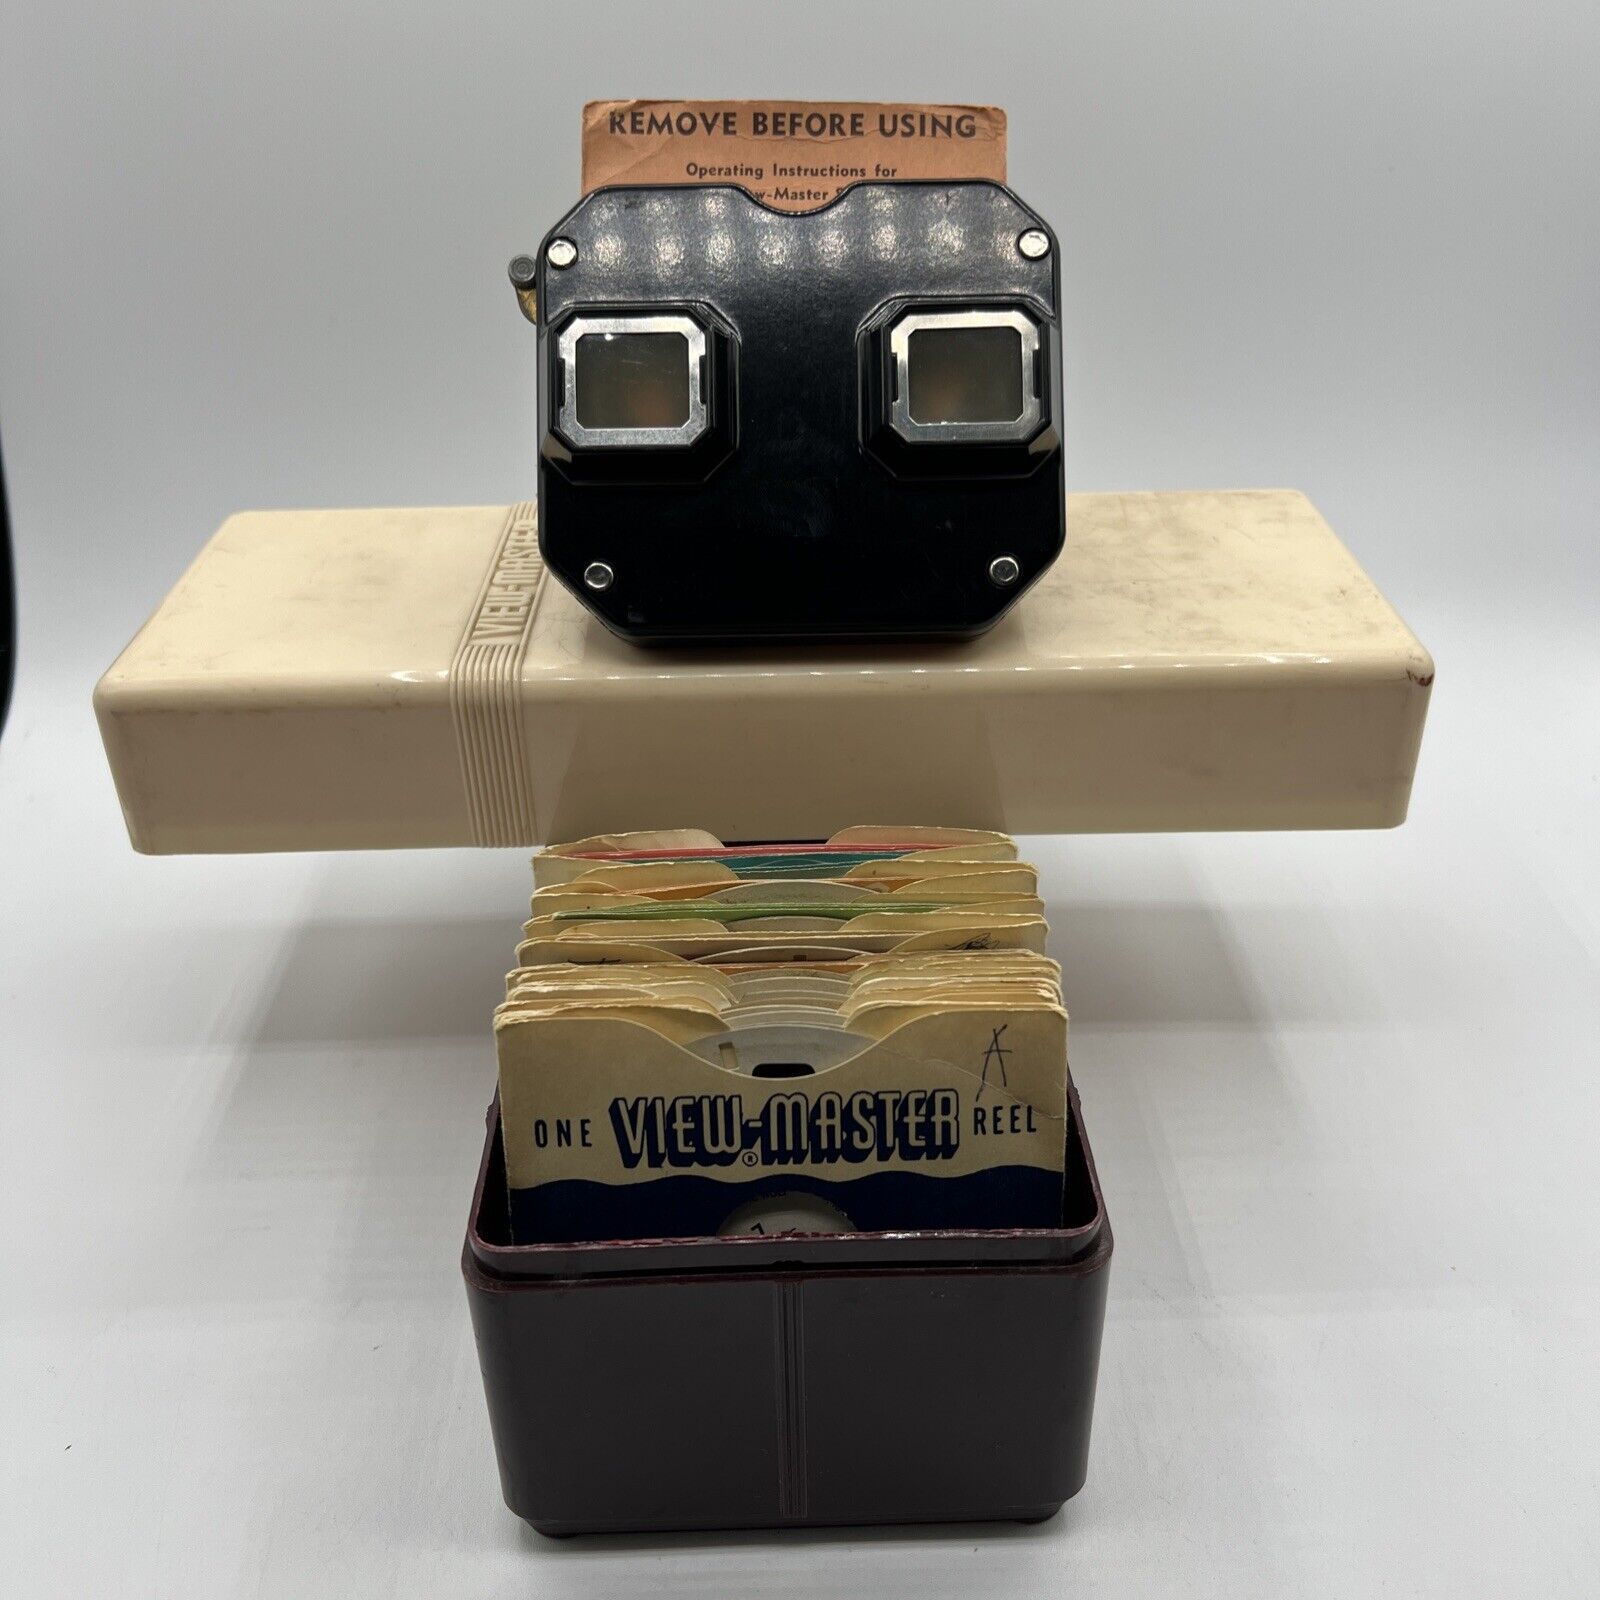 Sawyer’s View Master Bakelite Stereoscope With Box & 11 Reels Vintage 1950's